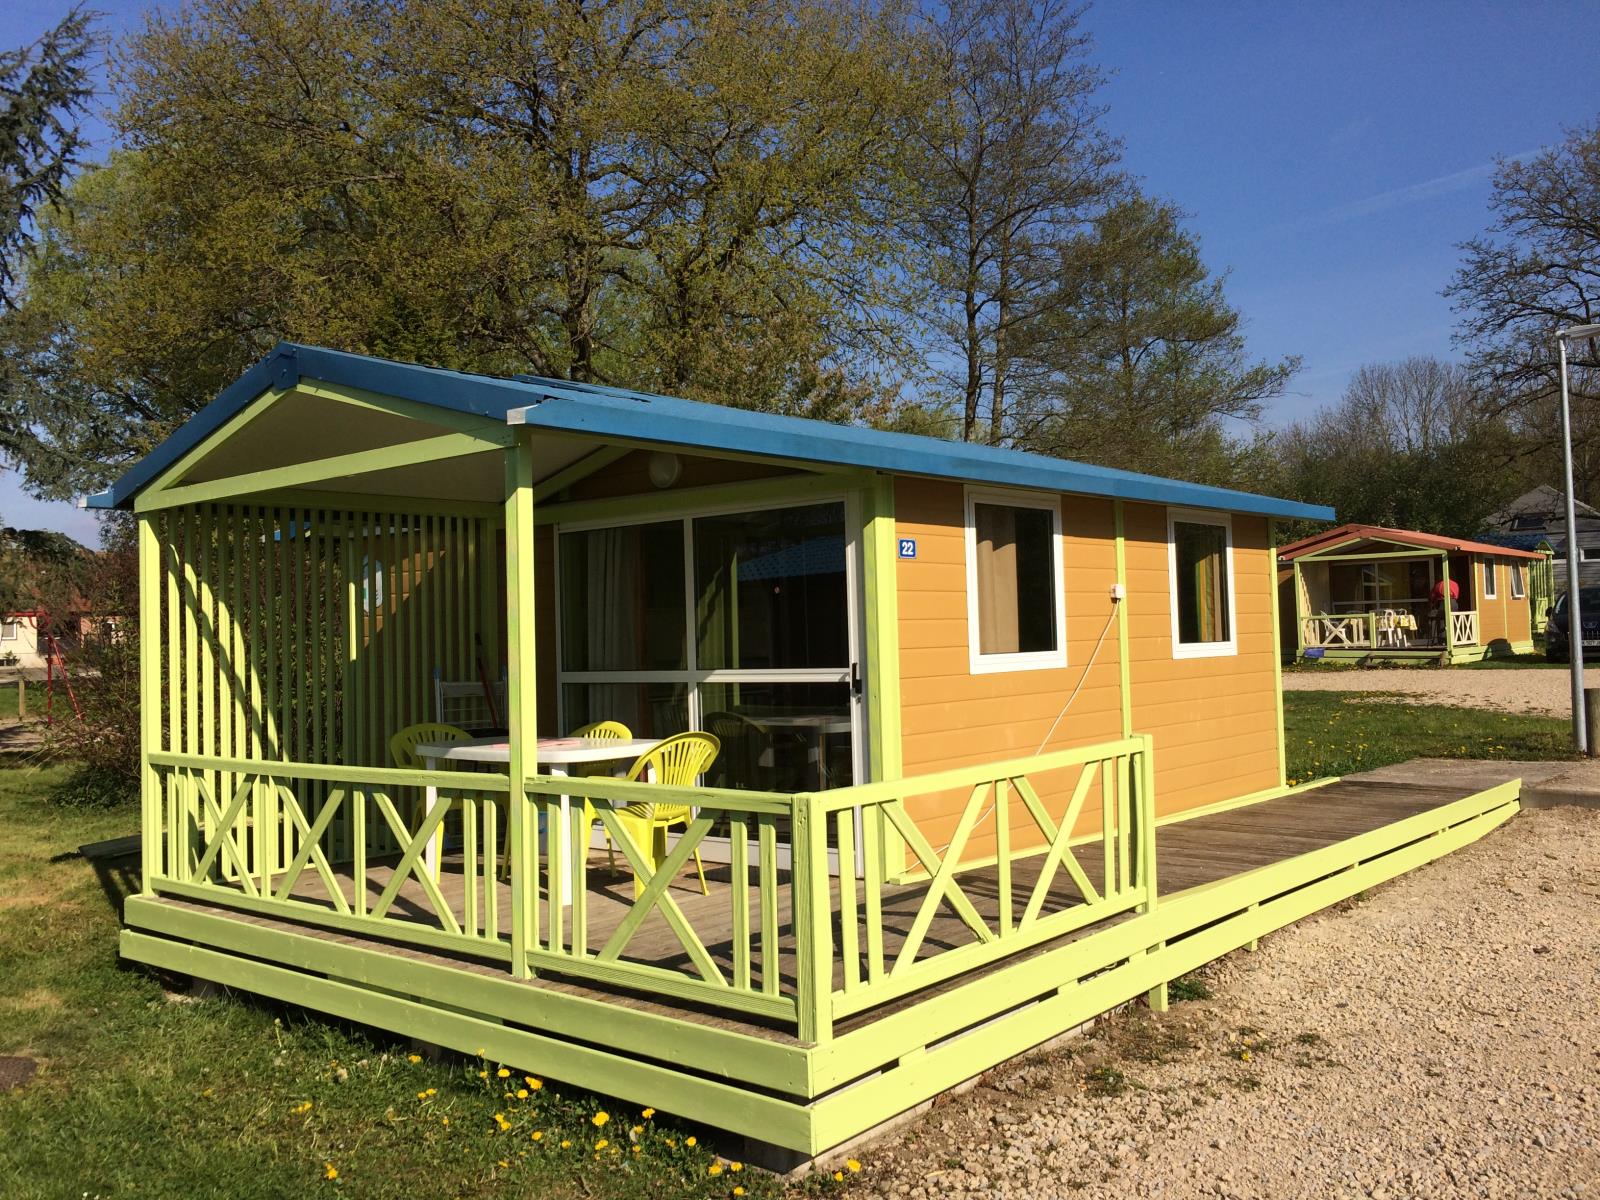 Chalet Moréa 25M² - 1 Bedroom (Adapted To The People With Reduced Mobility)